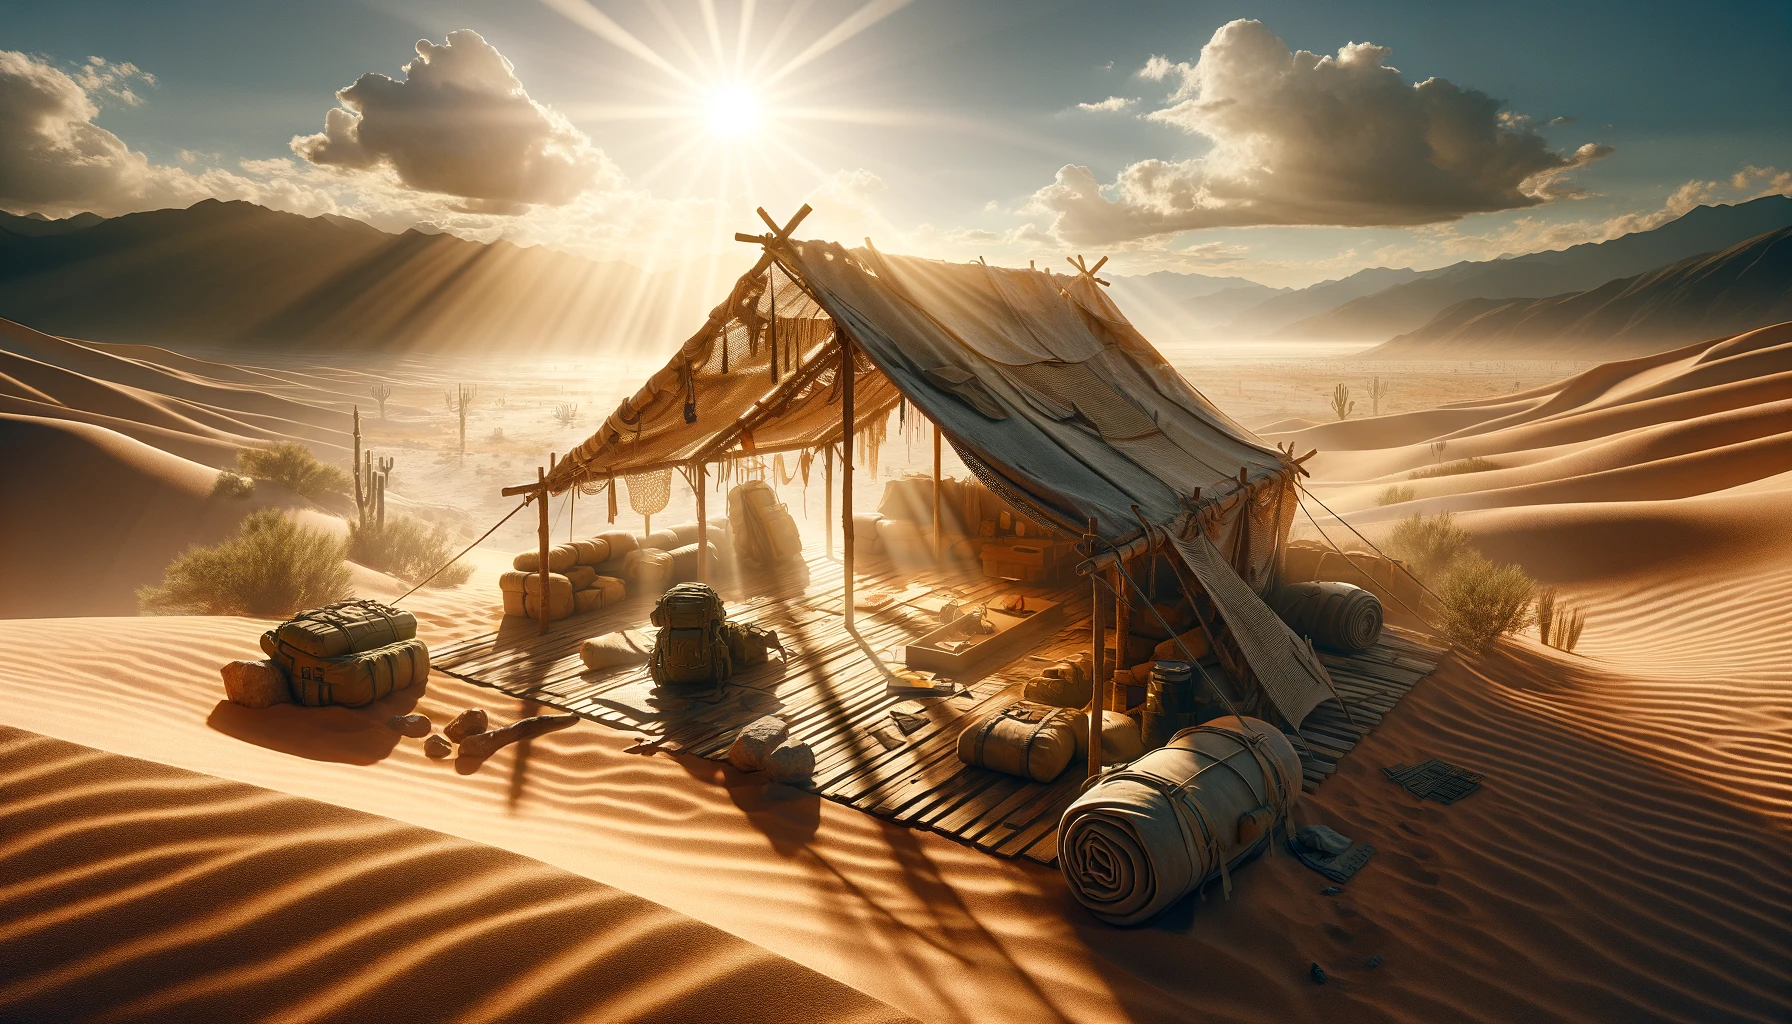 A highly detailed depiction of a desert shelter constructed for extreme survival, featuring sun-reflective materials and lightweight fabrics, set against a vast desert landscape under the harsh midday sun. The shelter is designed to maximize shade and minimize heat exposure, showcasing the use of natural desert elements like sand and rocks. This image captures the essence of adaptability and resilience, emphasizing the importance of environmental awareness and resourcefulness in survival situations.